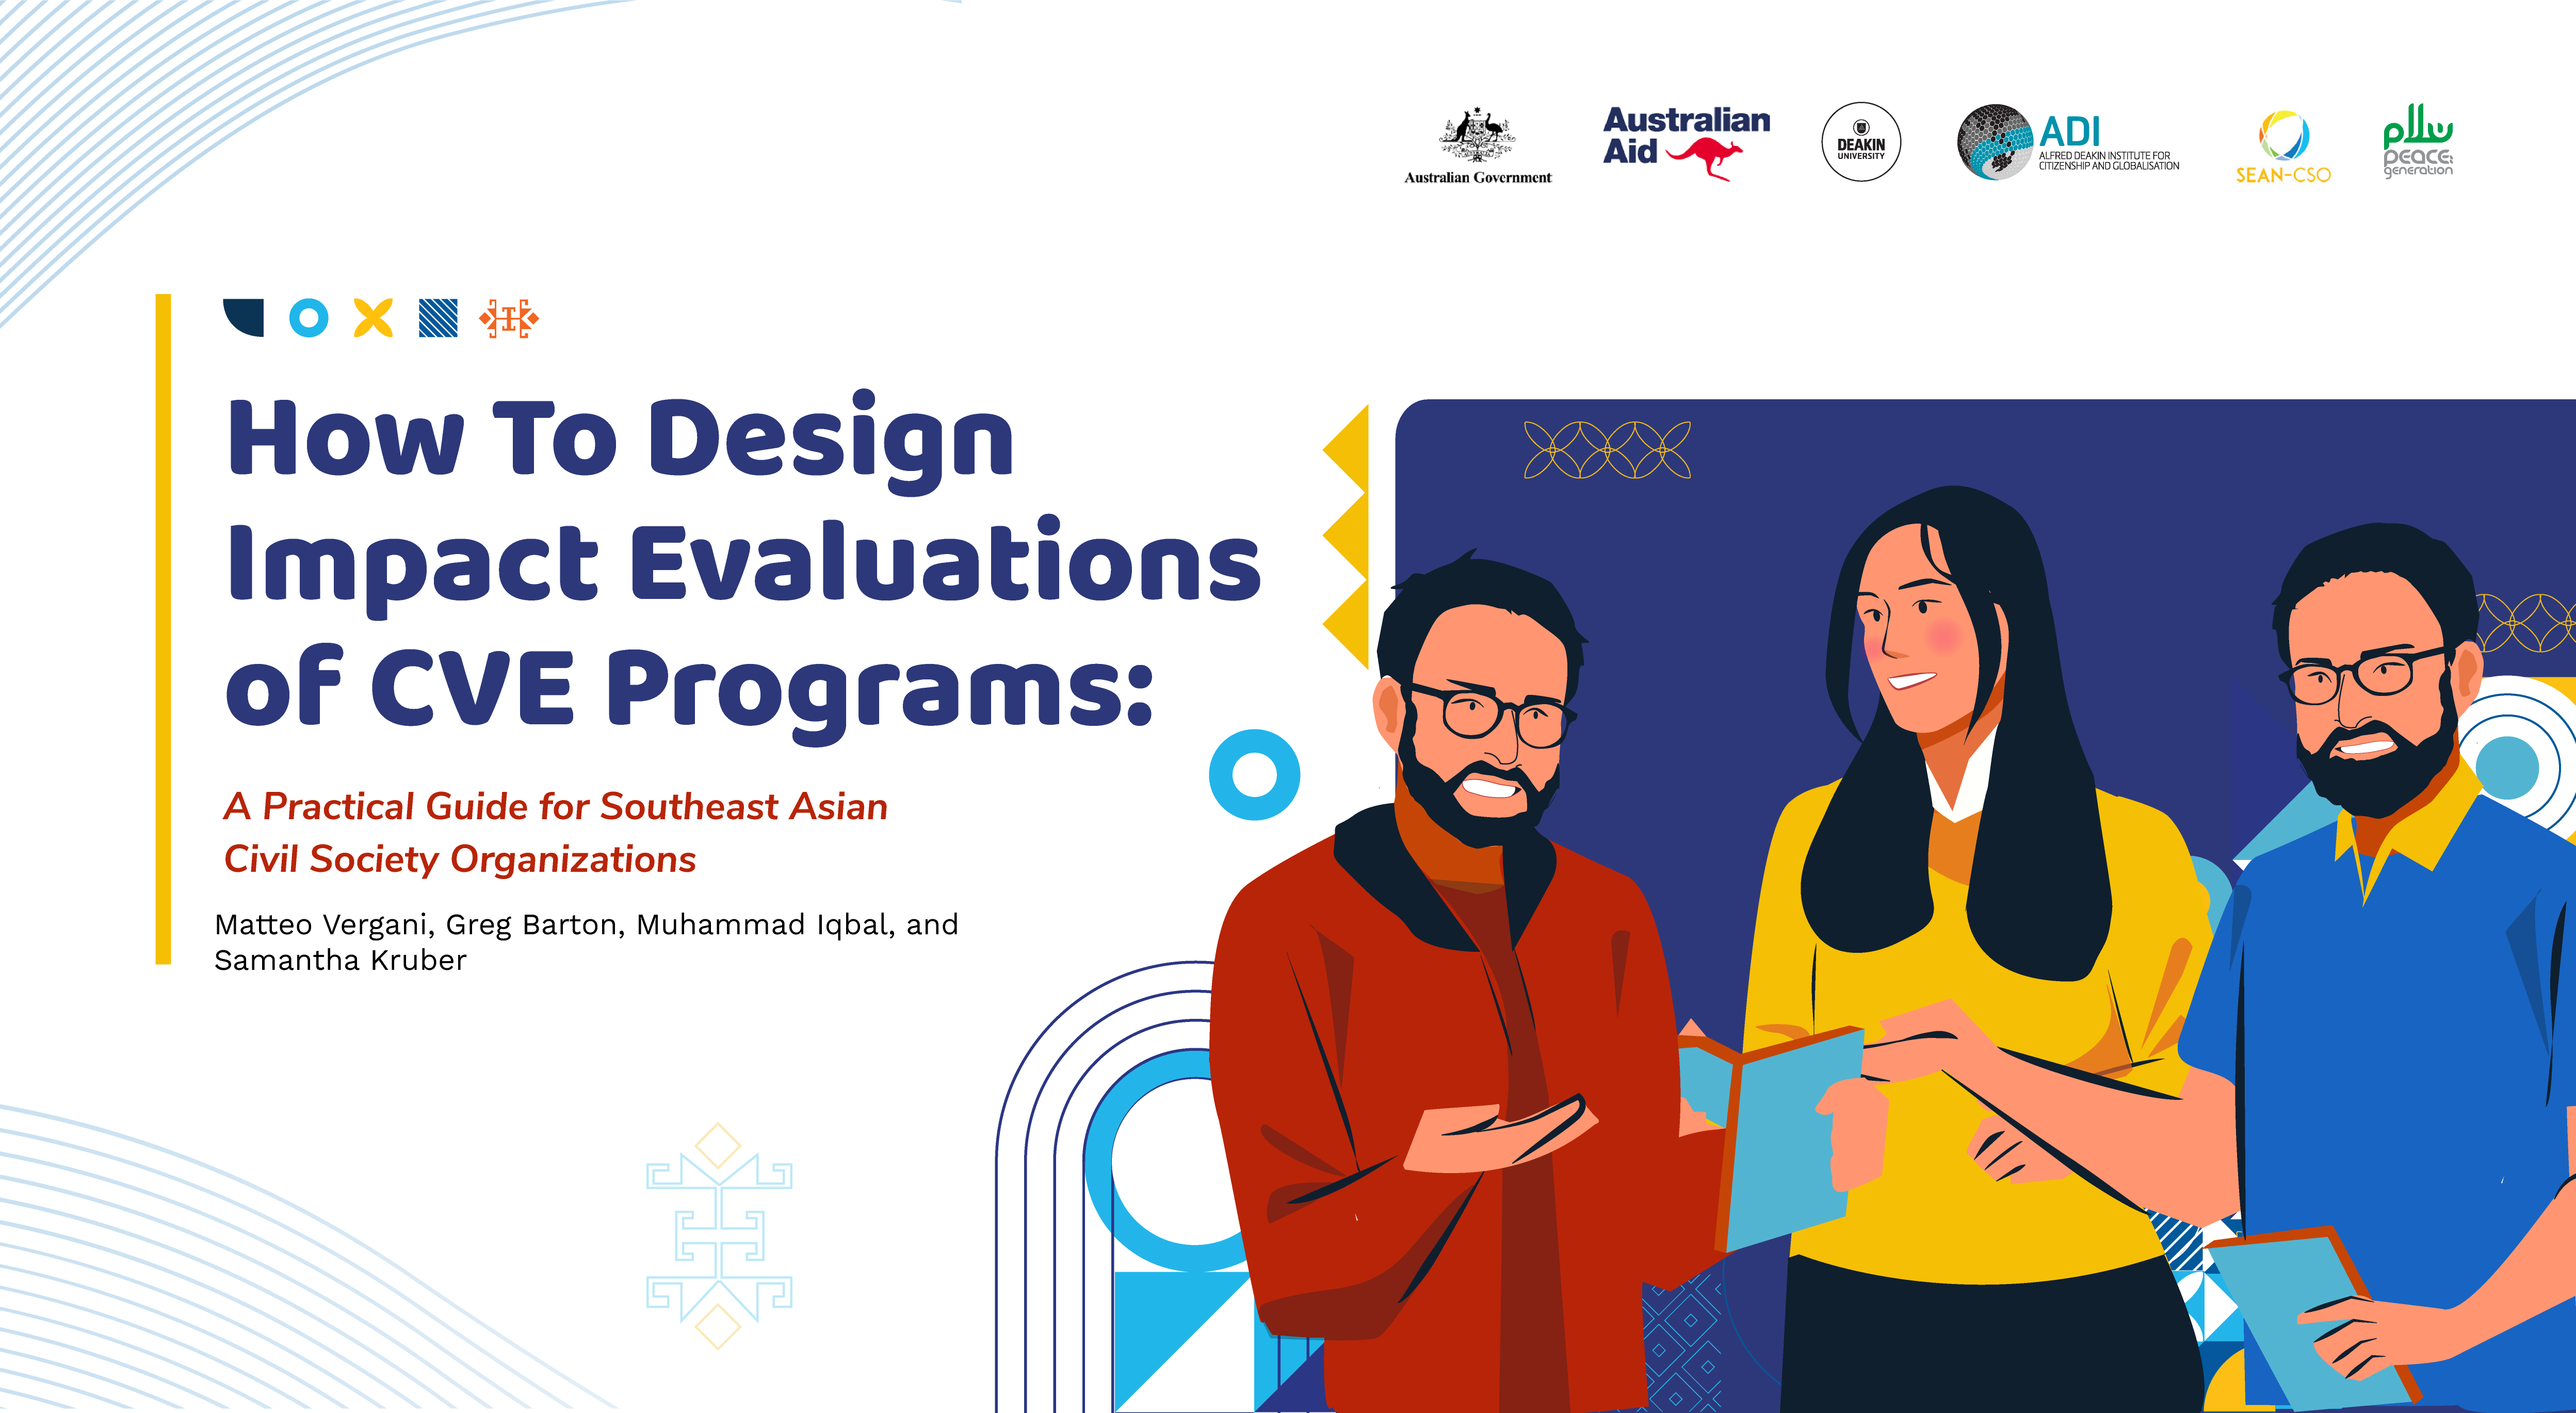 How To Design Impact Evaluations of CVE Programs: A Practical Guide for Southeast Asian Civil Society Organizations